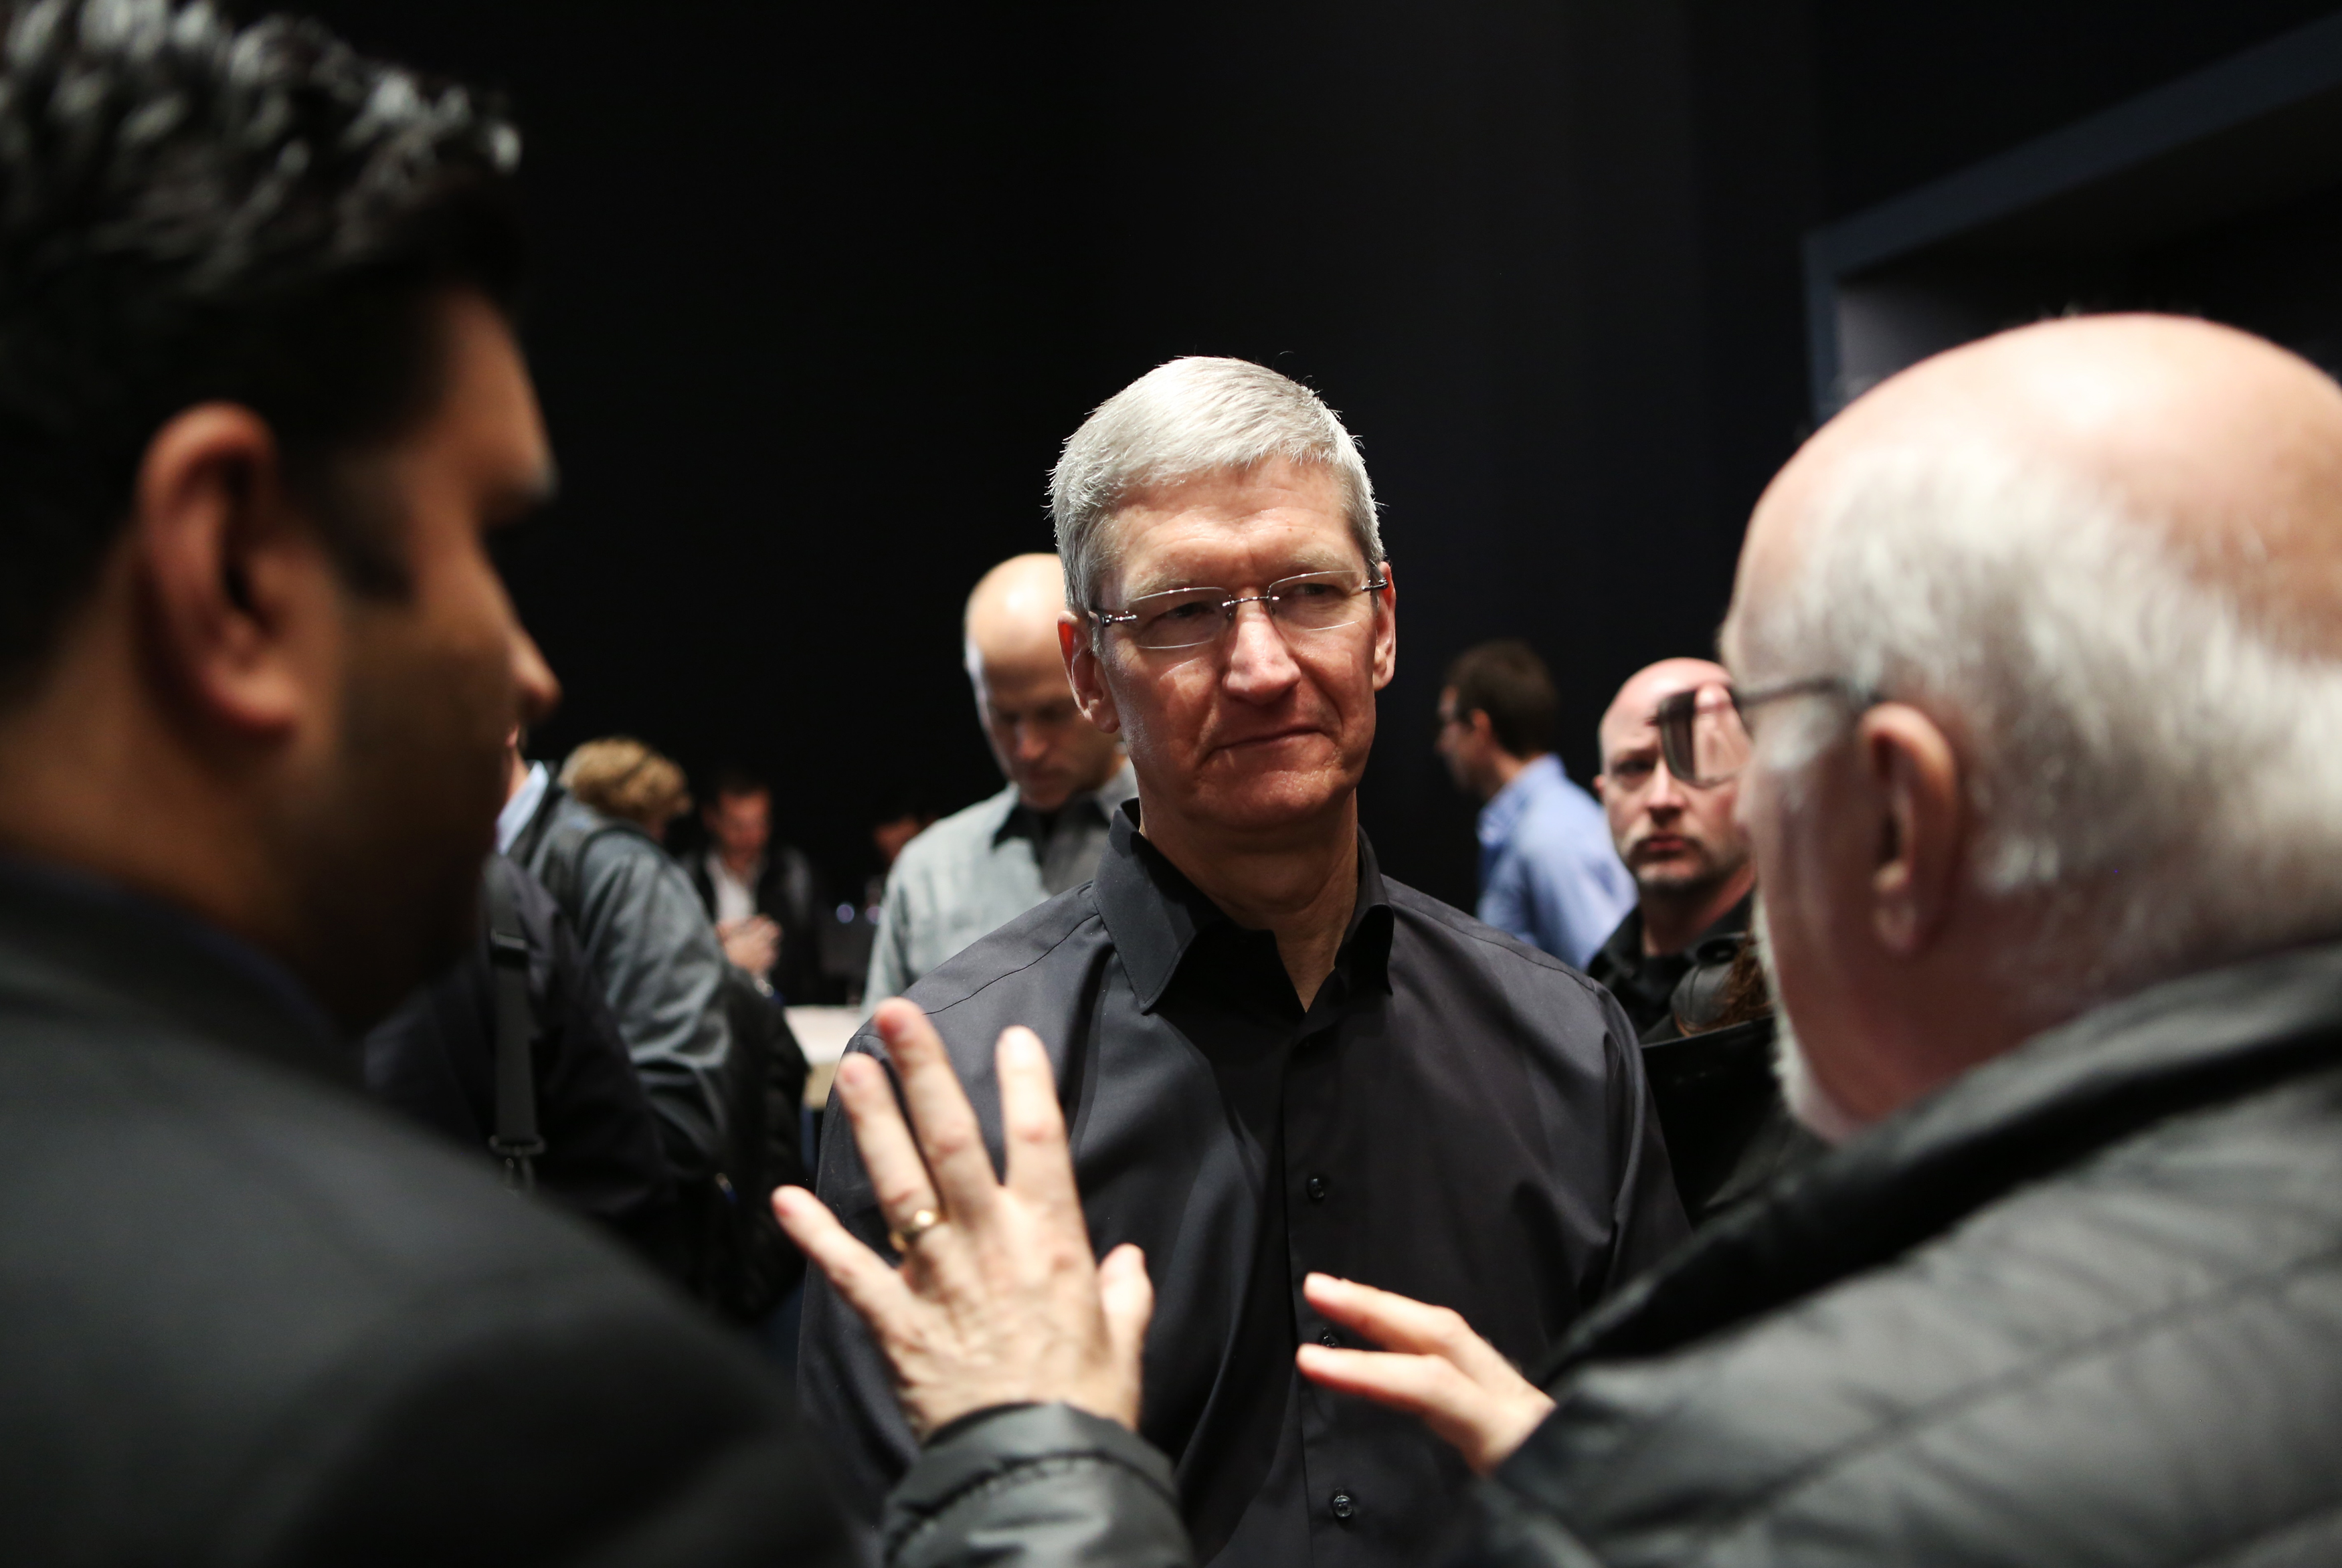 Apple Inc. CEO Tim Cook talks to tech writer Walt Mossberg during an Apple event in San Francisco